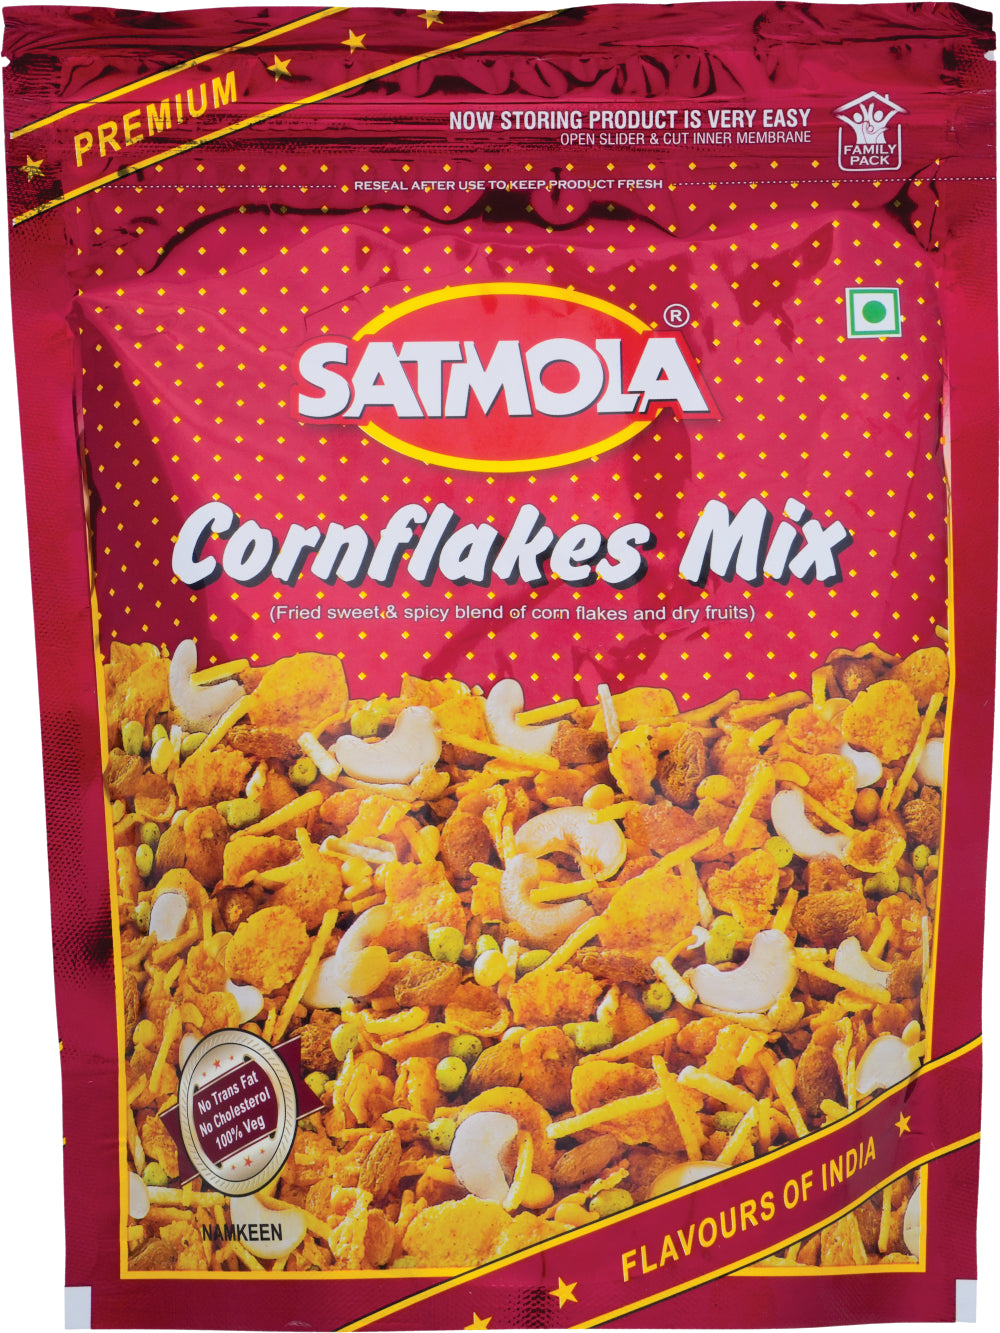 Satmola Crunchy Delight: Cornflakes Mix - Perfect Snack for Anytime Enjoyment